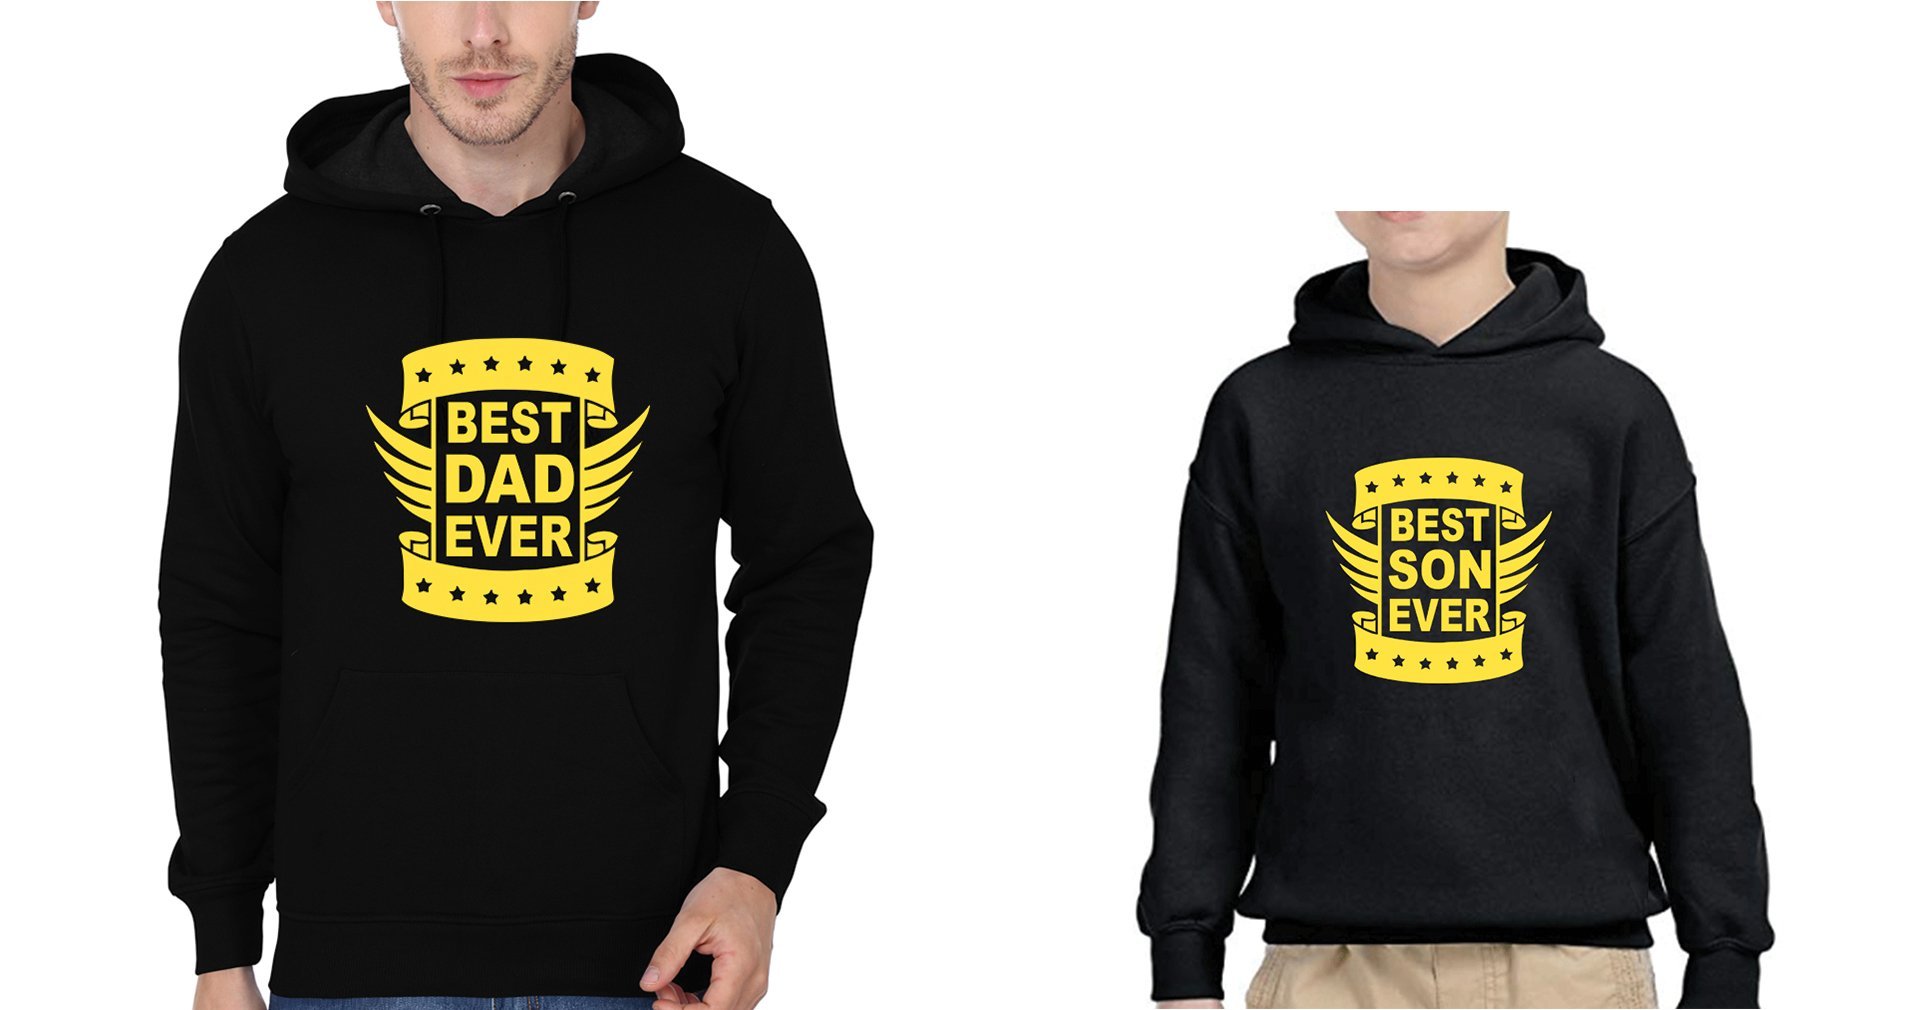 Best Dad Ever Best Son Ever Father and Son Matching Hoodies- FunkyTradition - FunkyTradition